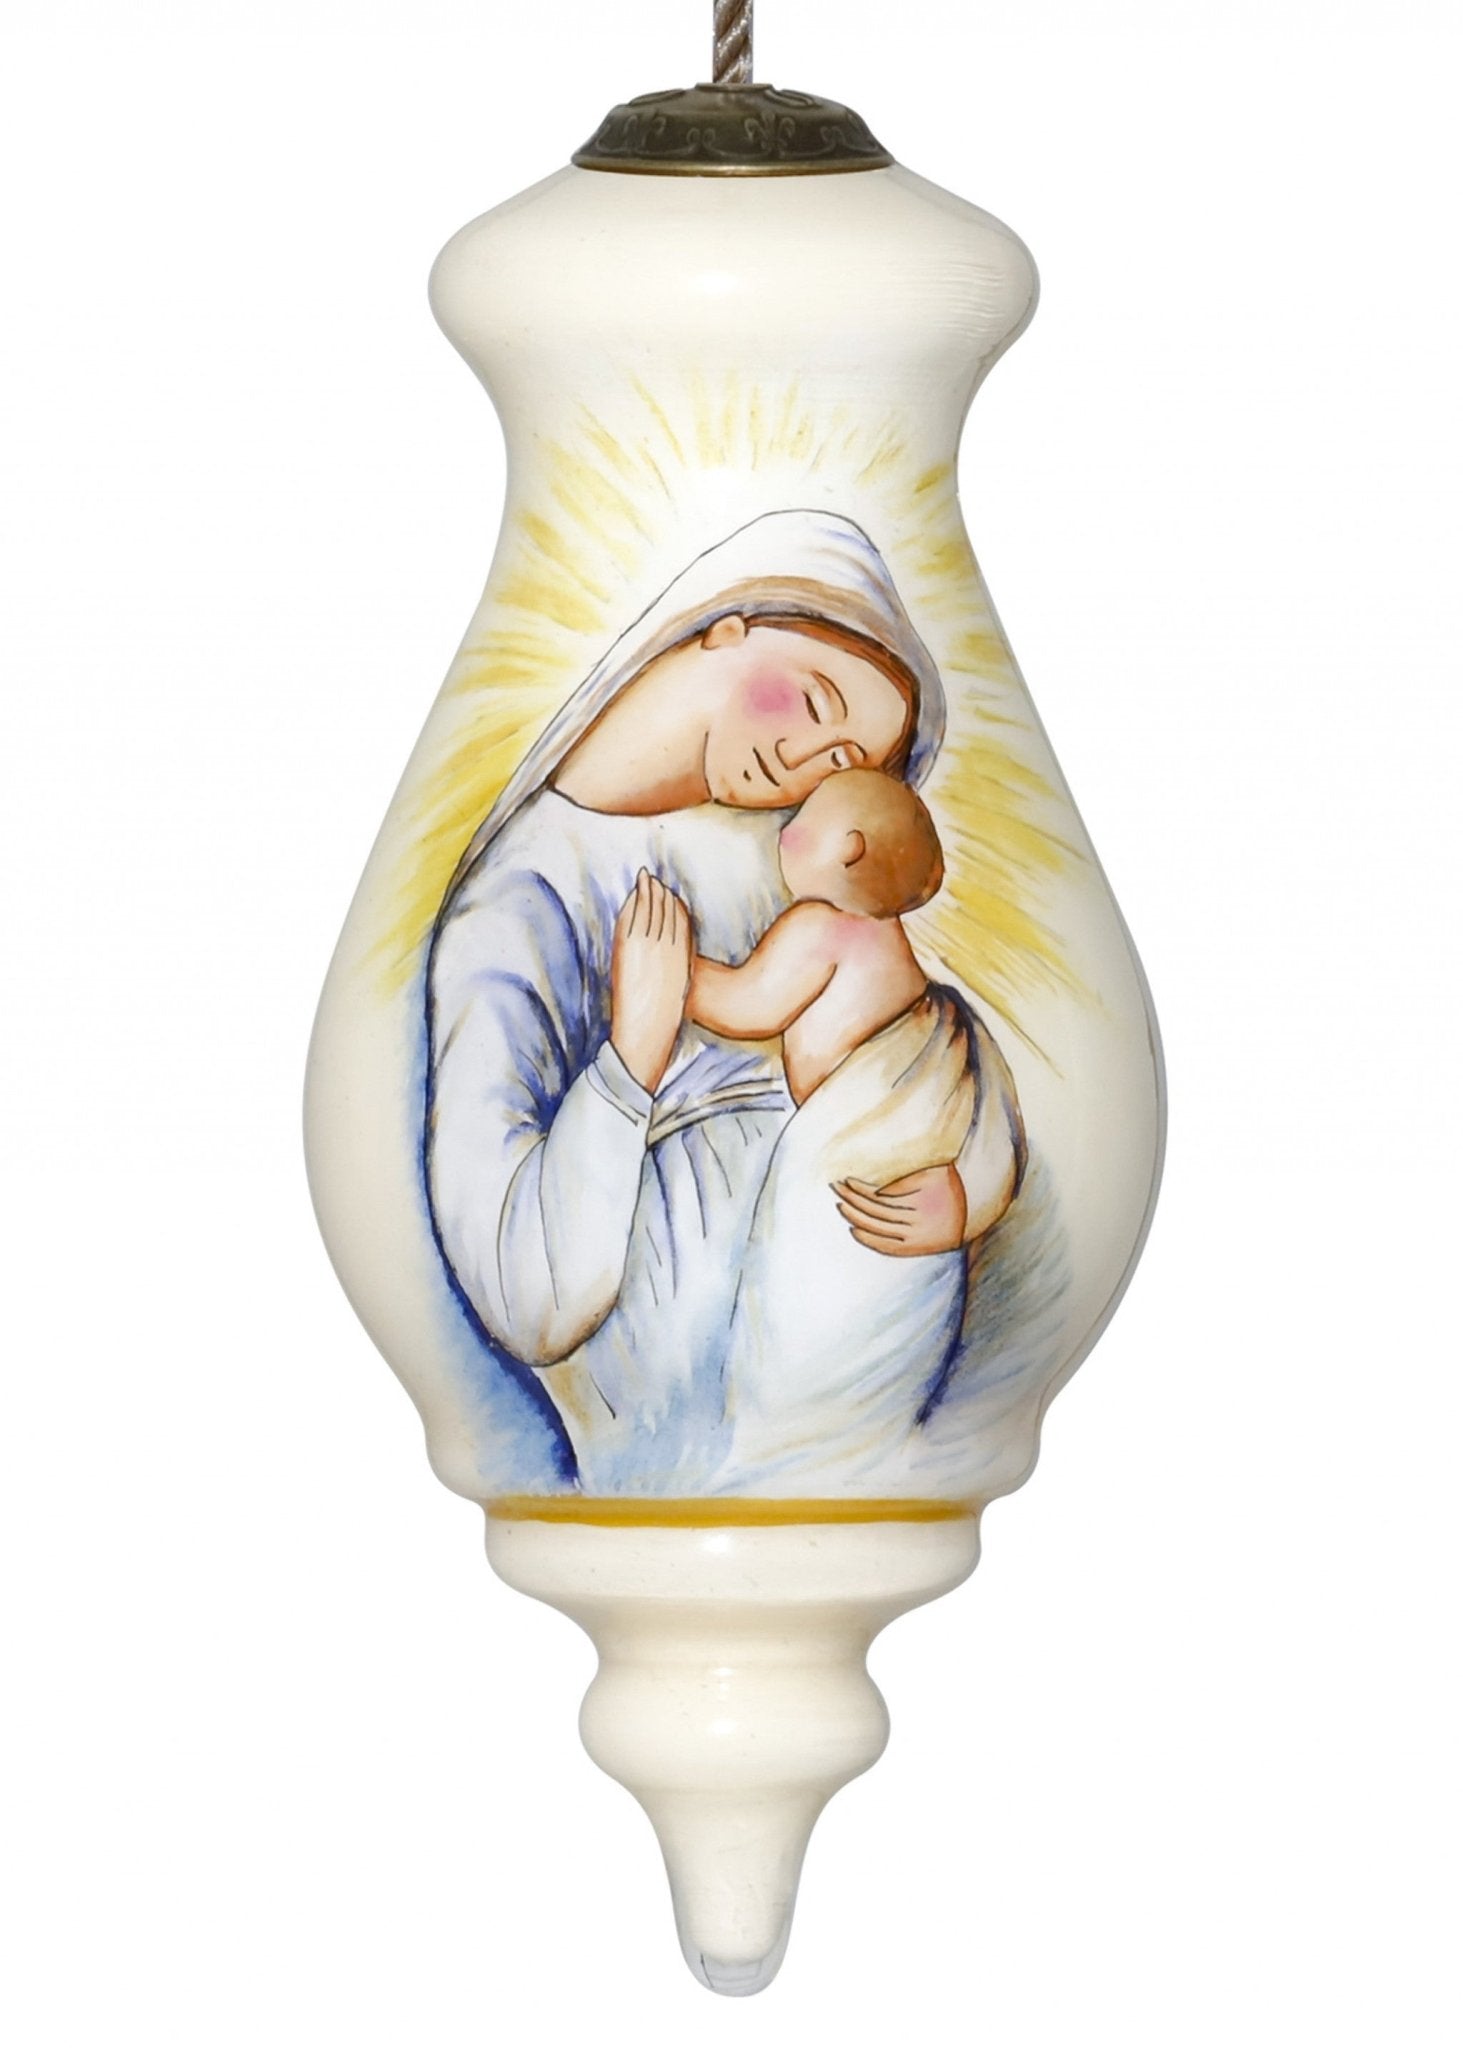 Mother-Mary-with-Baby-Hand-Painted-Mouth-Blown-Glass-Ornament-Christmas-Ornaments